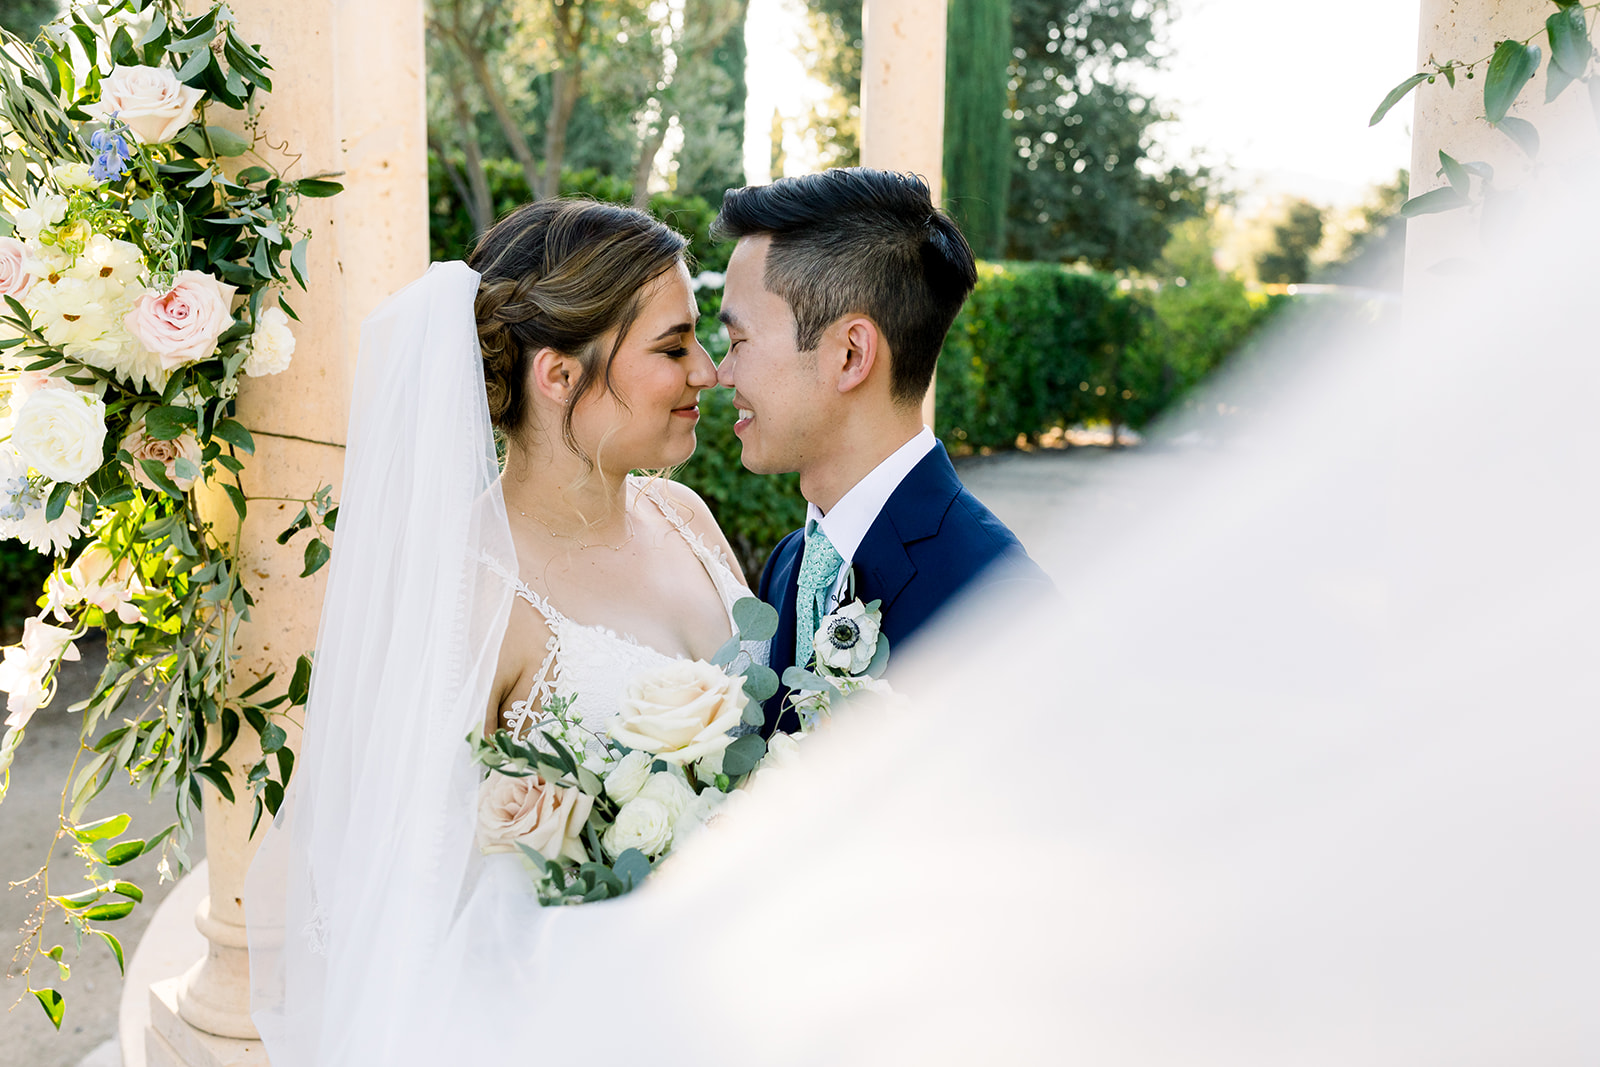 SLO wedding photographer captures bride and groom at the alter at allegretto resort wedding